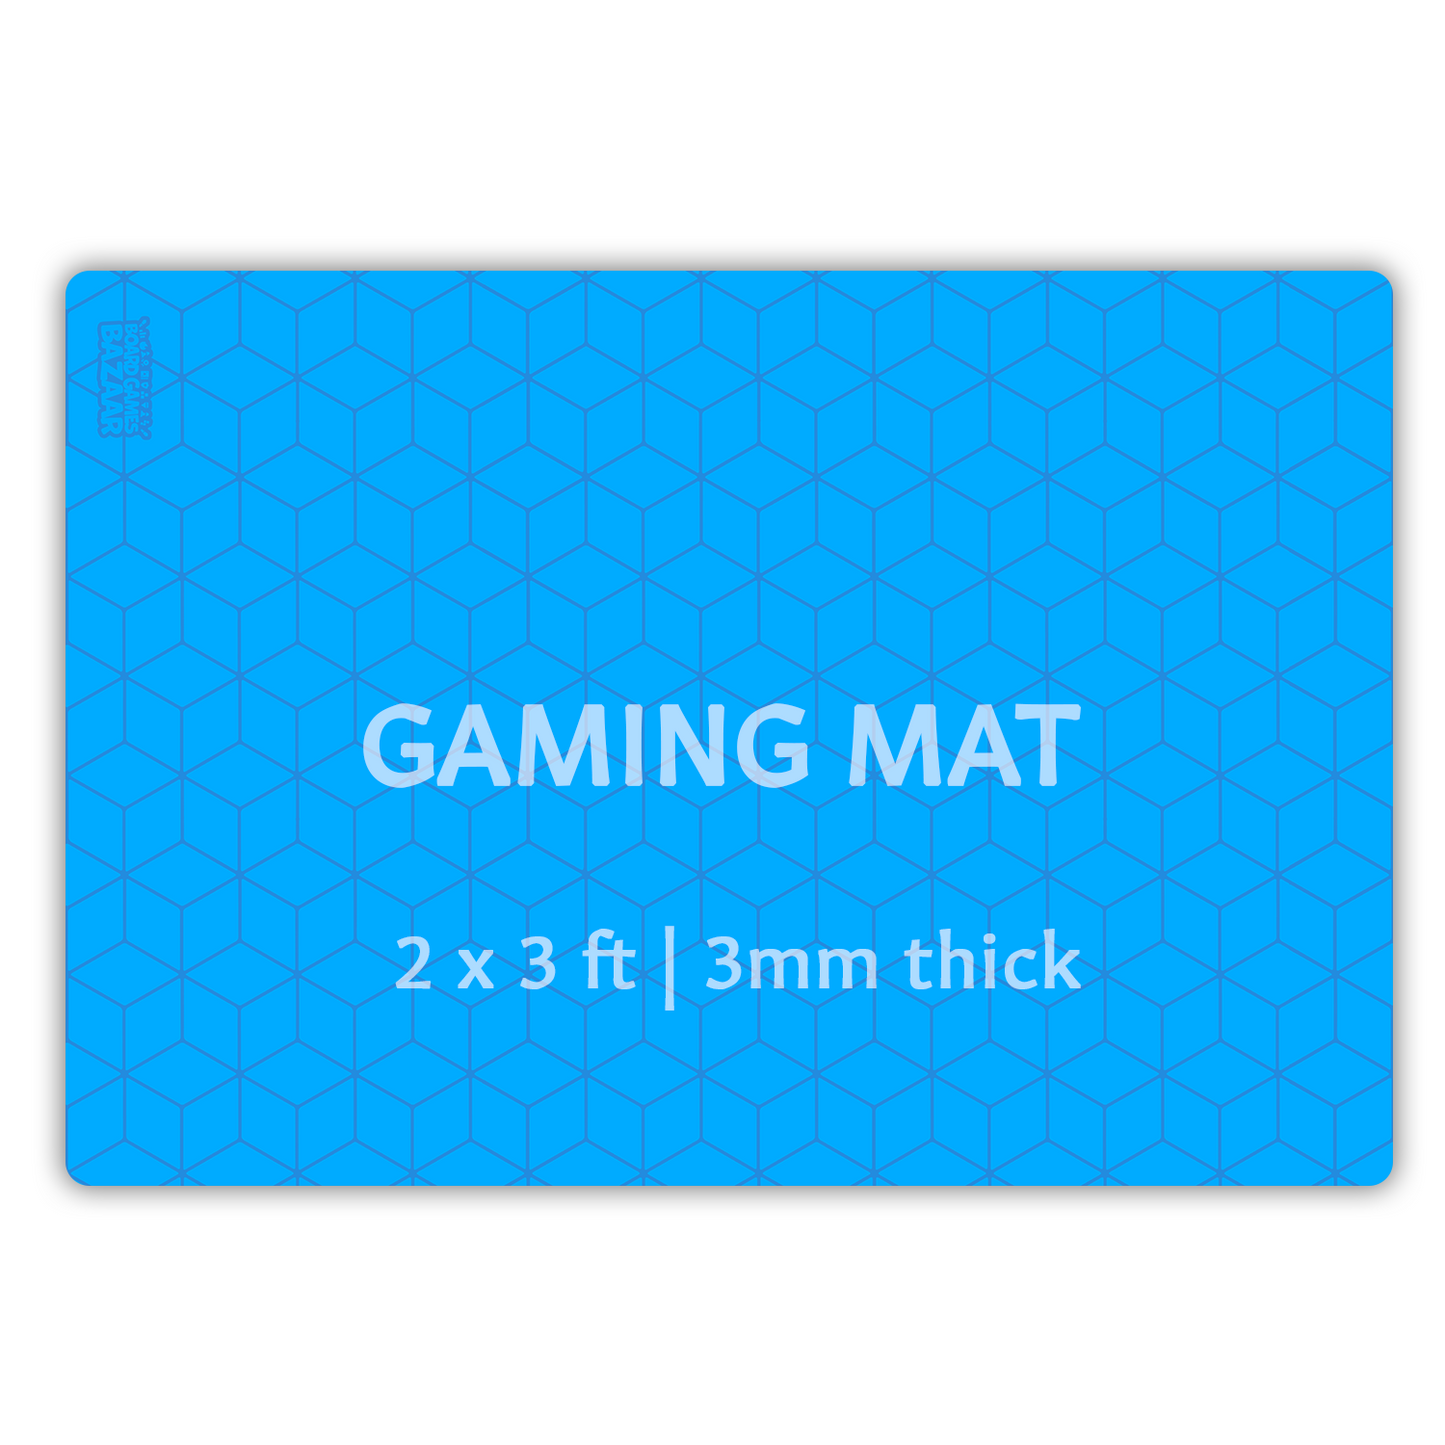 BLUE GAMING MAT | 2 X 3 ft | 3mm thick